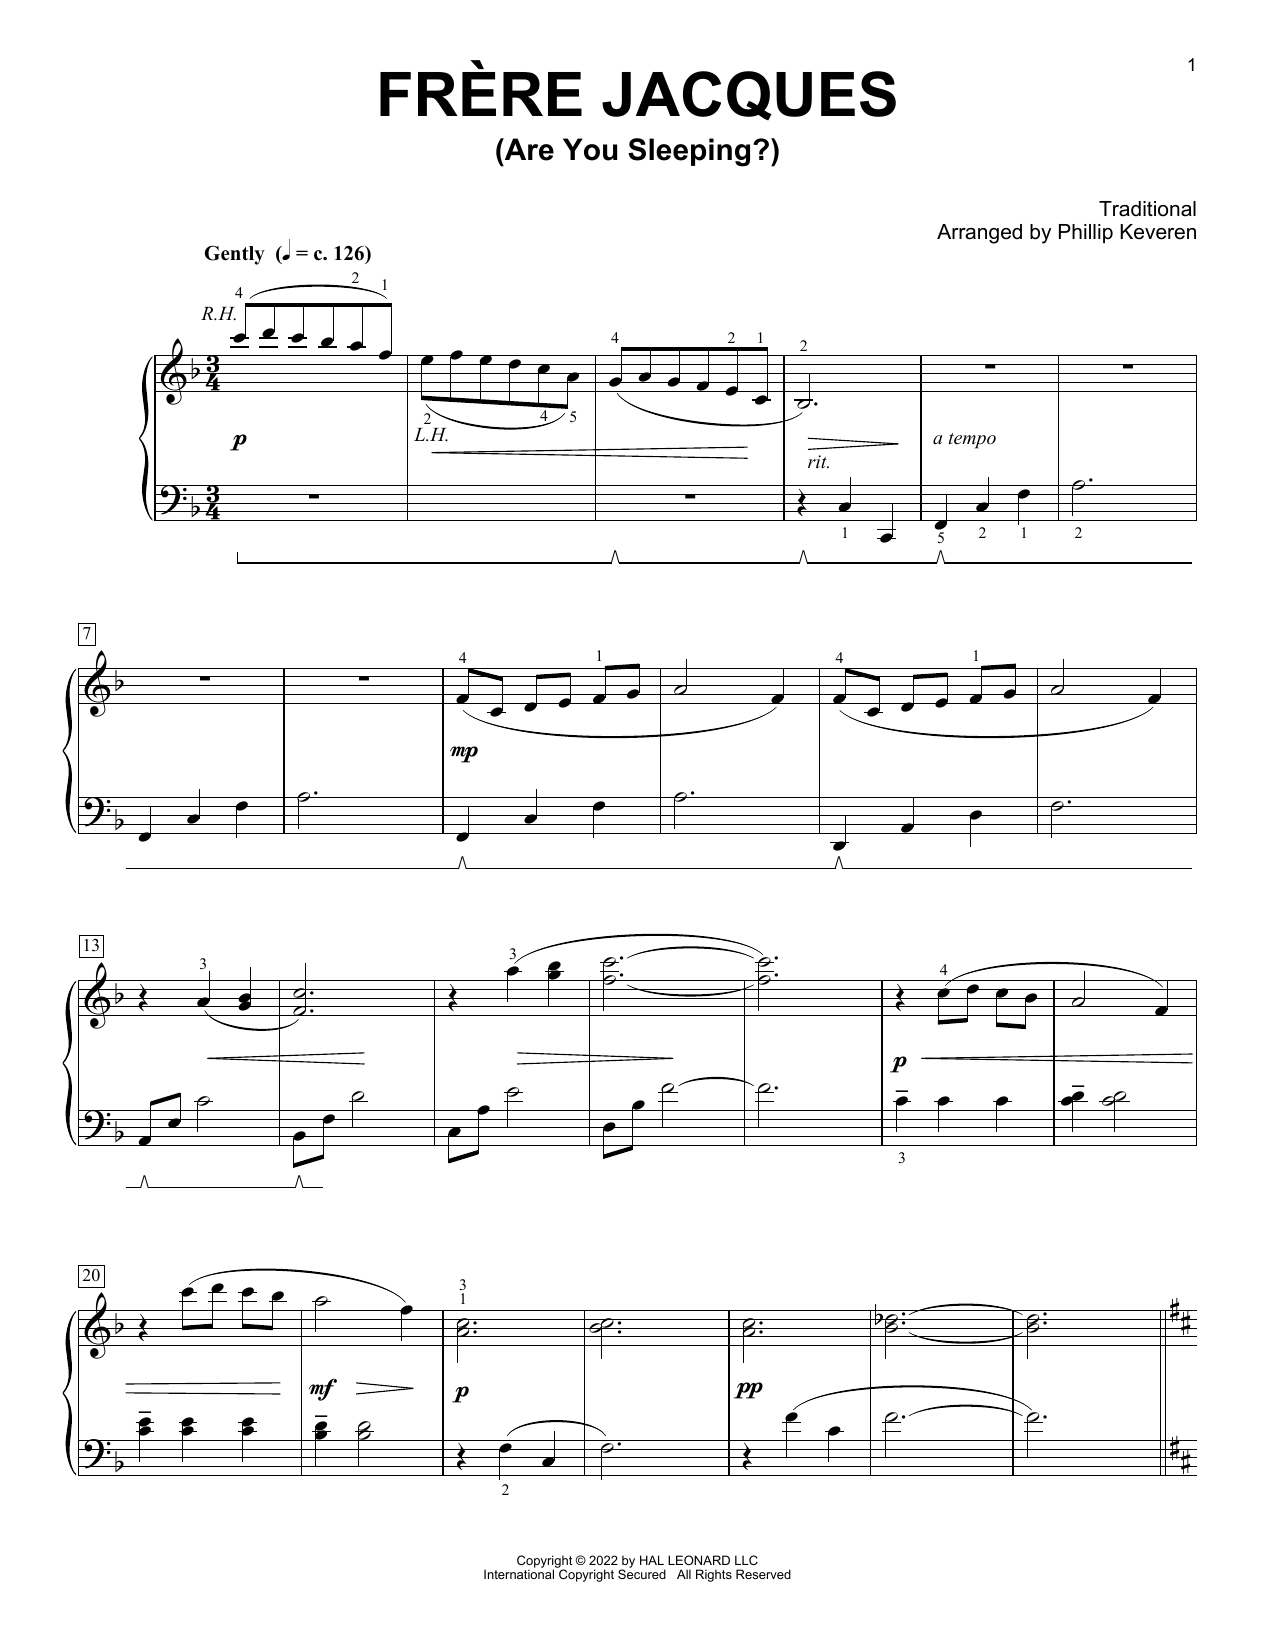 Download Traditional Frere Jacques (Are You Sleeping?) (arr. Sheet Music